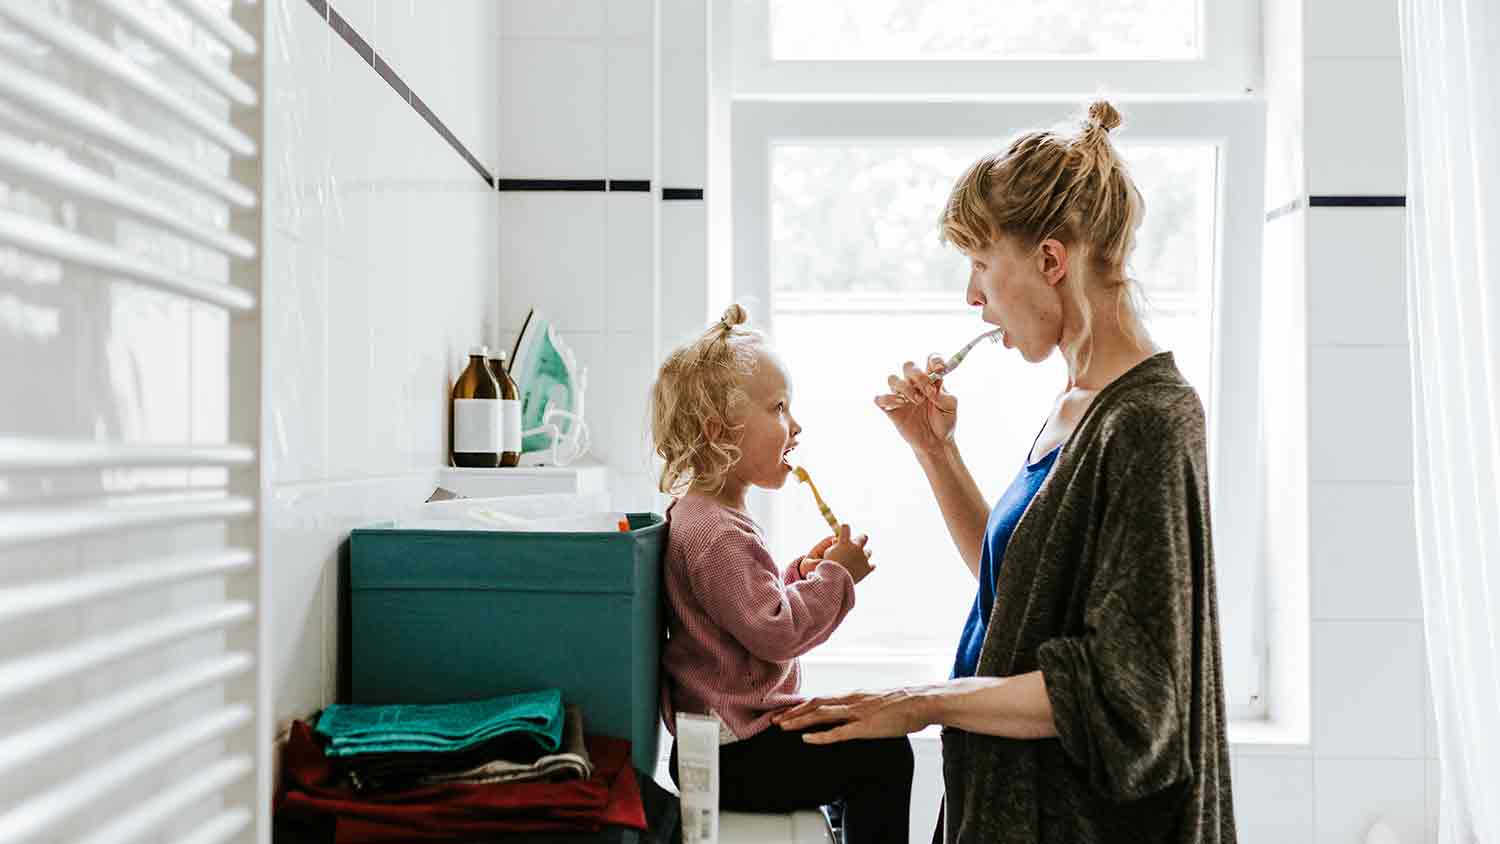 Toddler and mother face each other both brushing their teeth